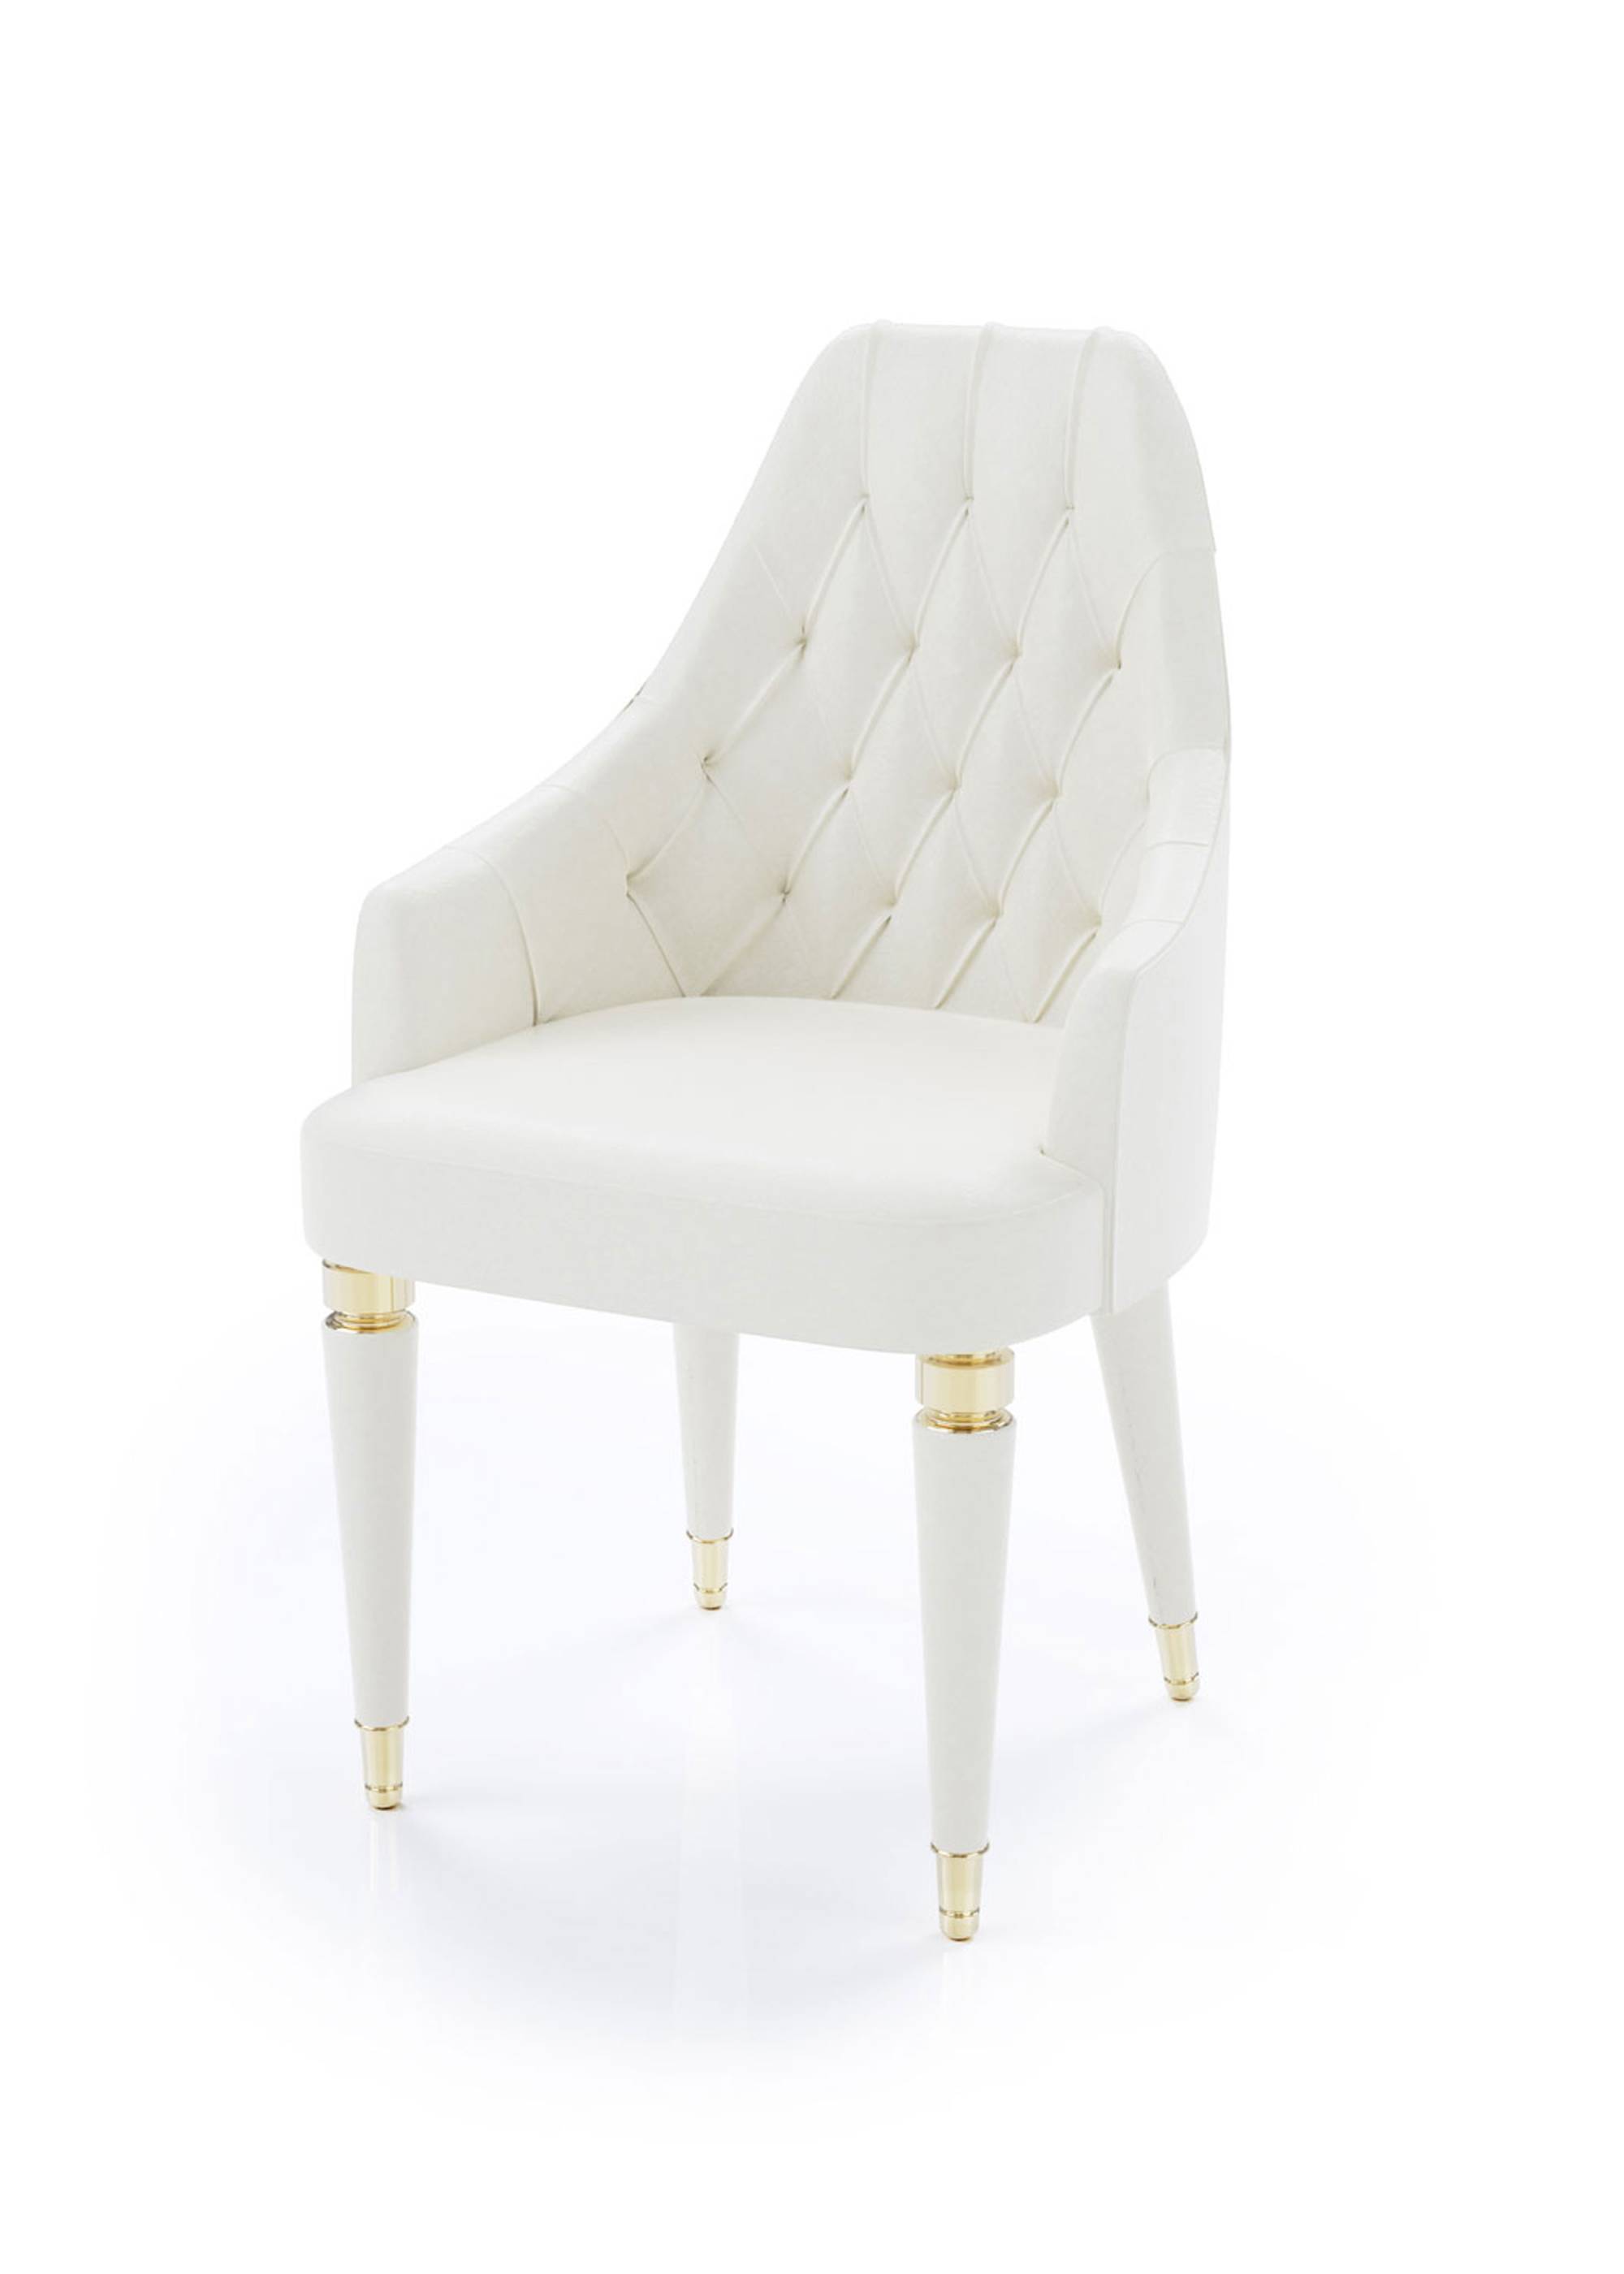 ART. 2337 – The elegance of luxury classic Chairs made in Italy by C.G. Capelletti.